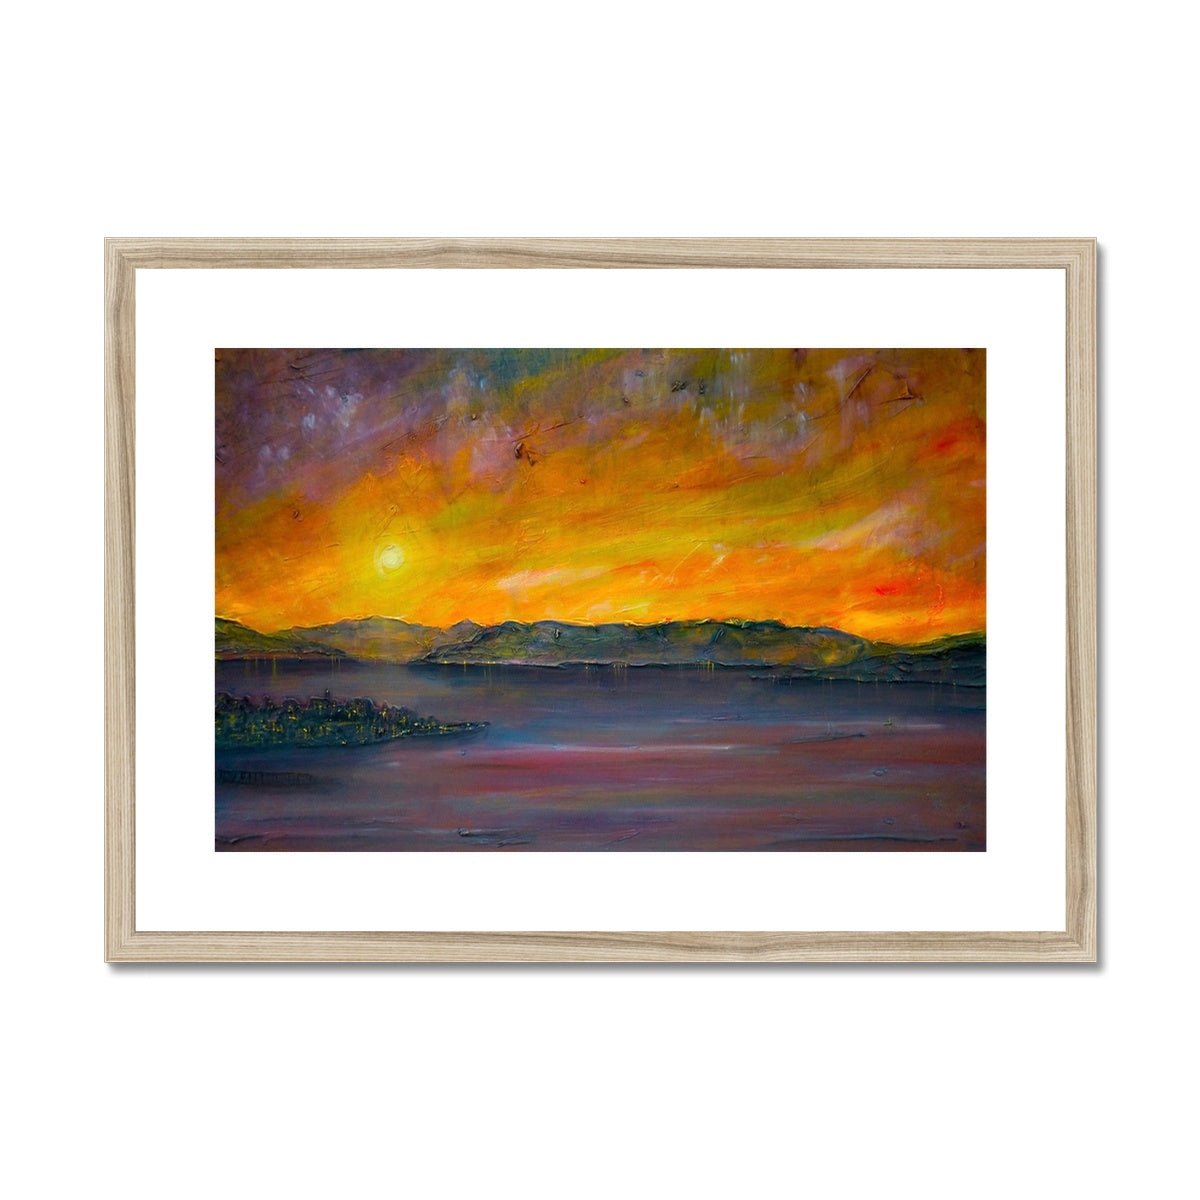 Sunset Over Gourock Painting | Framed & Mounted Prints From Scotland-Framed & Mounted Prints-River Clyde Art Gallery-A2 Landscape-Natural Frame-Paintings, Prints, Homeware, Art Gifts From Scotland By Scottish Artist Kevin Hunter